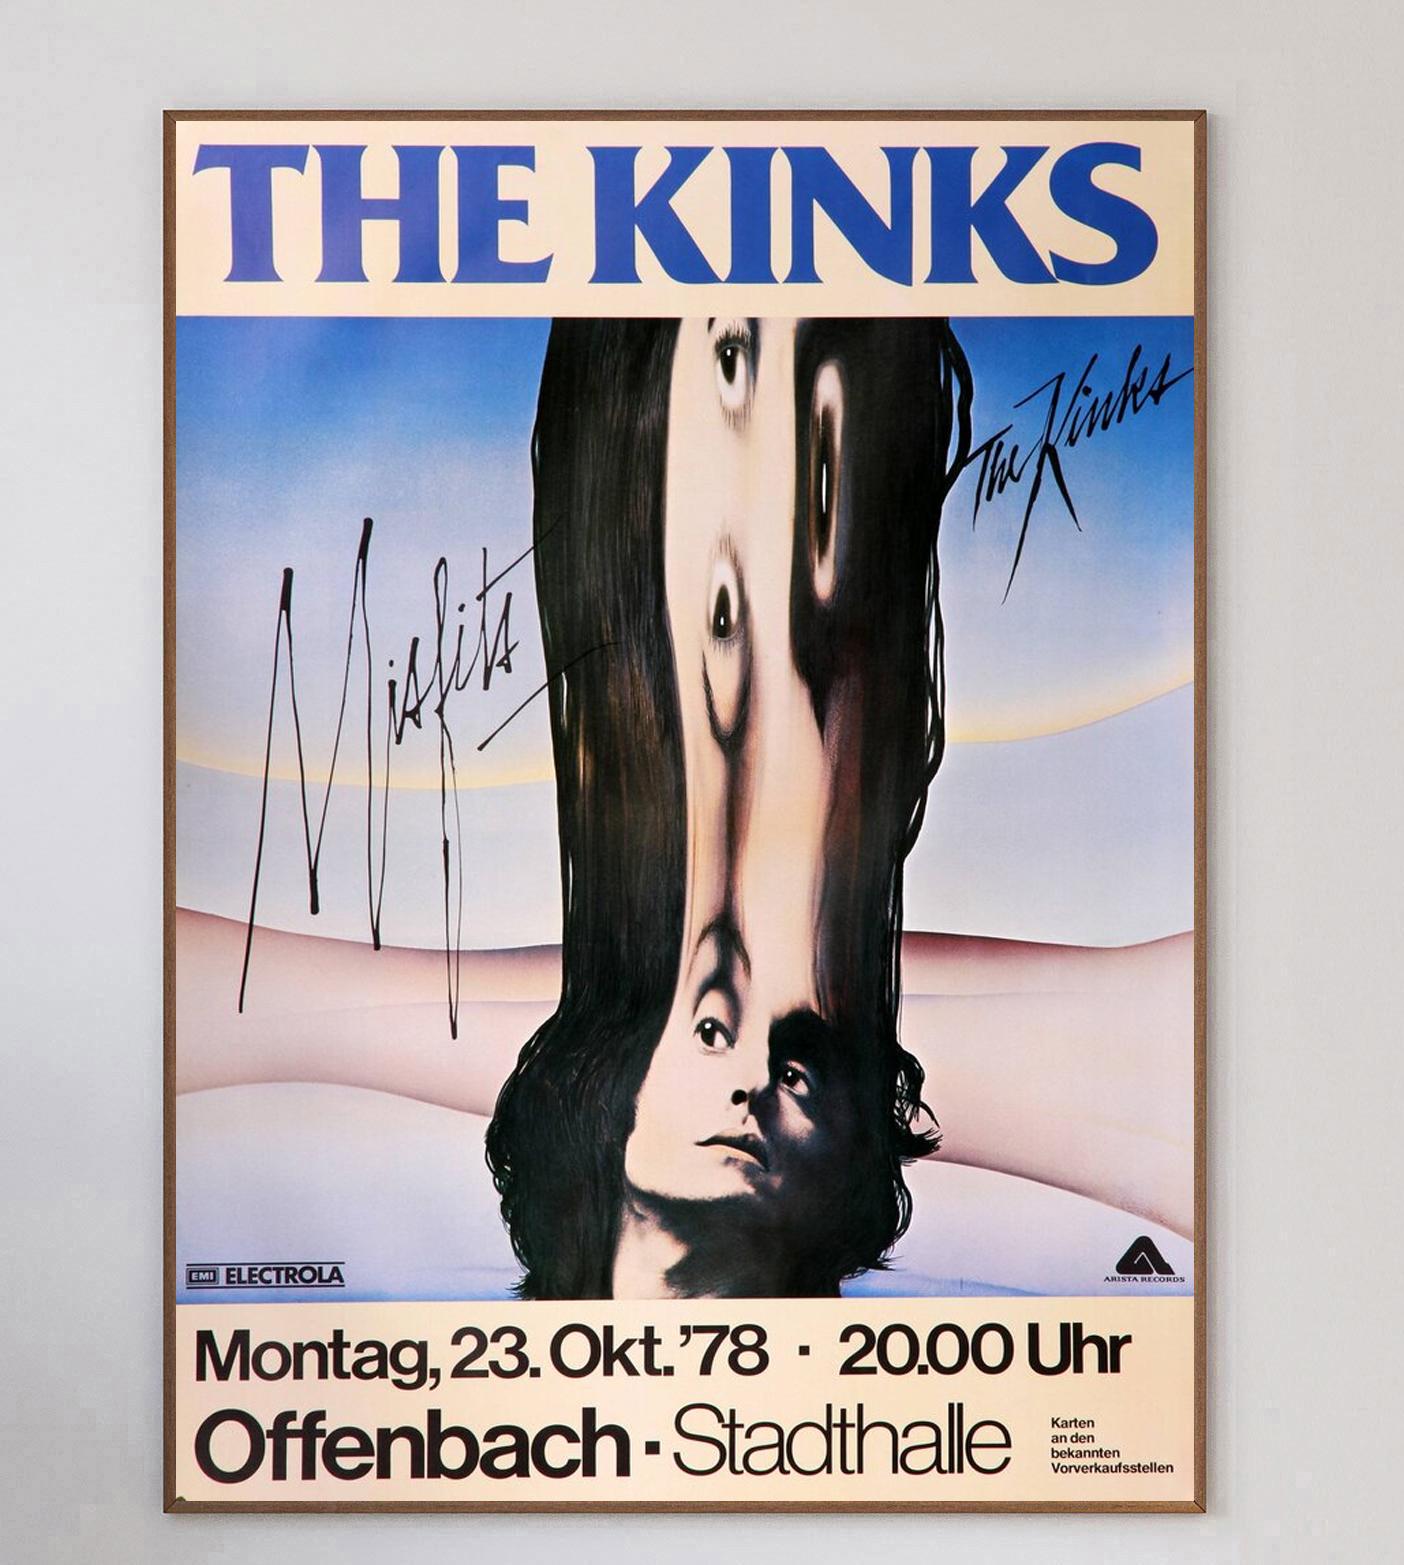 Wonderful poster promoting The Kinks live concert at the Offenbach Stadthalle in Germany in October 1978. Featuring the album artwork from 